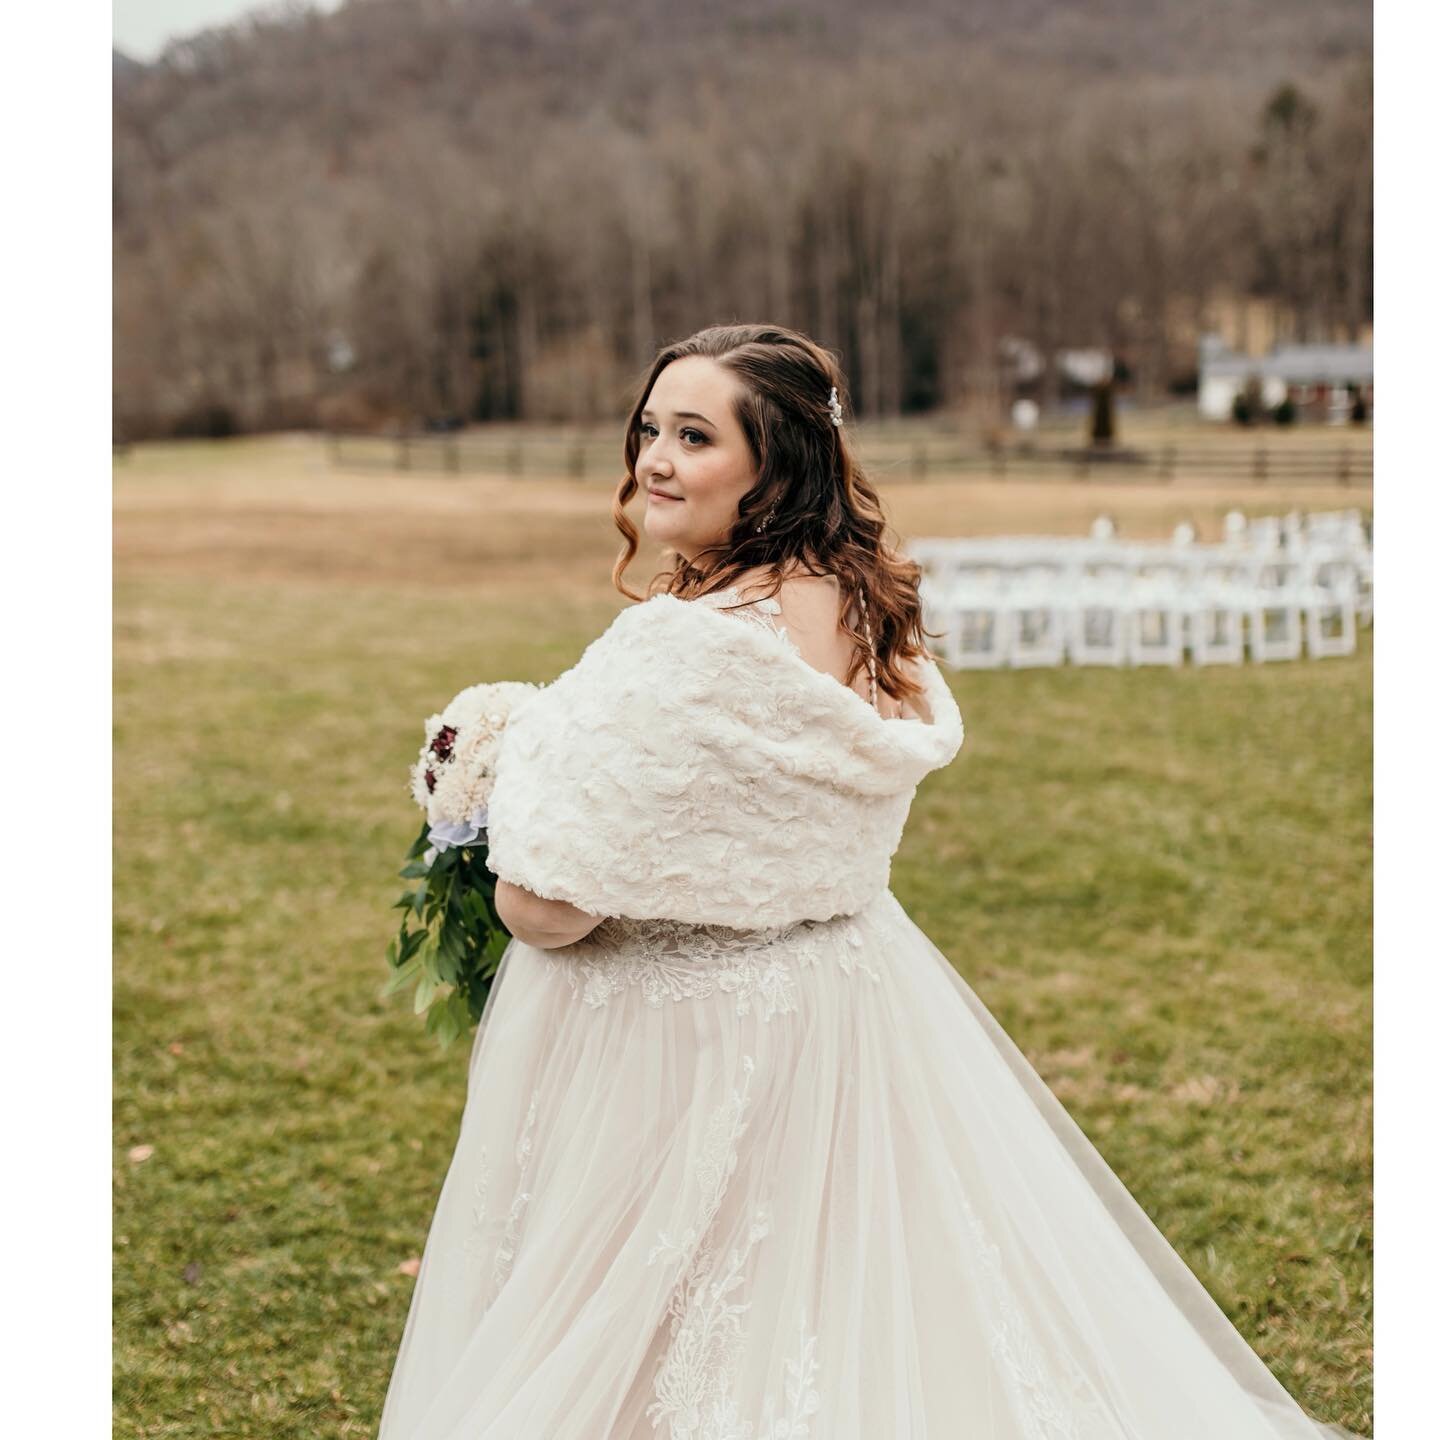 Carley&rsquo;s wedding day makeup from this past March ✨🌿❄️ Isn&rsquo;t she beautiful! I love these photos, love a winter wedding aesthetic✨❄️

At the lovely rustic farmhouse barn venue on Weaverville 🌿✨: @fields_of_blackberry_cove 

📷: @susanna_c